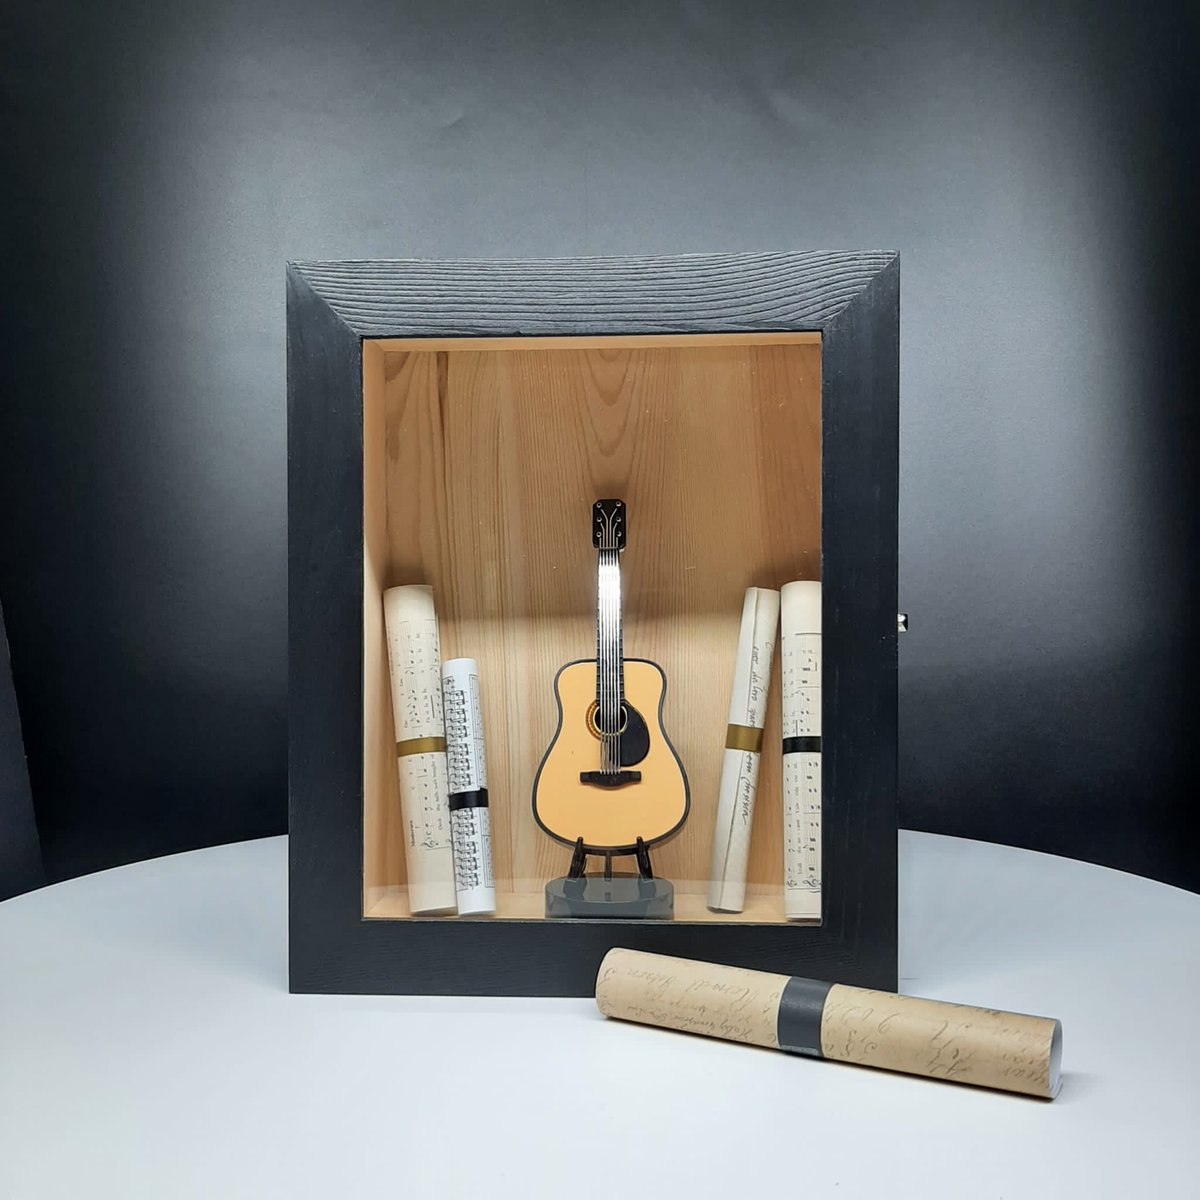 🎶 Pitch-perfect presents 🎶 Dad’s up next!

Just pick your favorite color, box size and personalize it with text (frame or glass)

#FathersDay #fatheranddaughter #gift